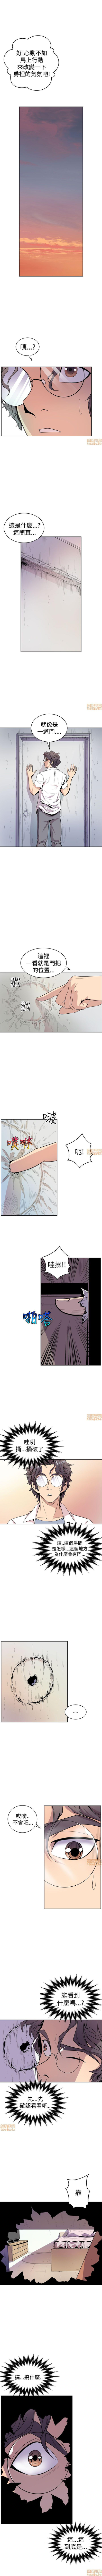 Duro 縫隙 1-2 Cougar - Page 7